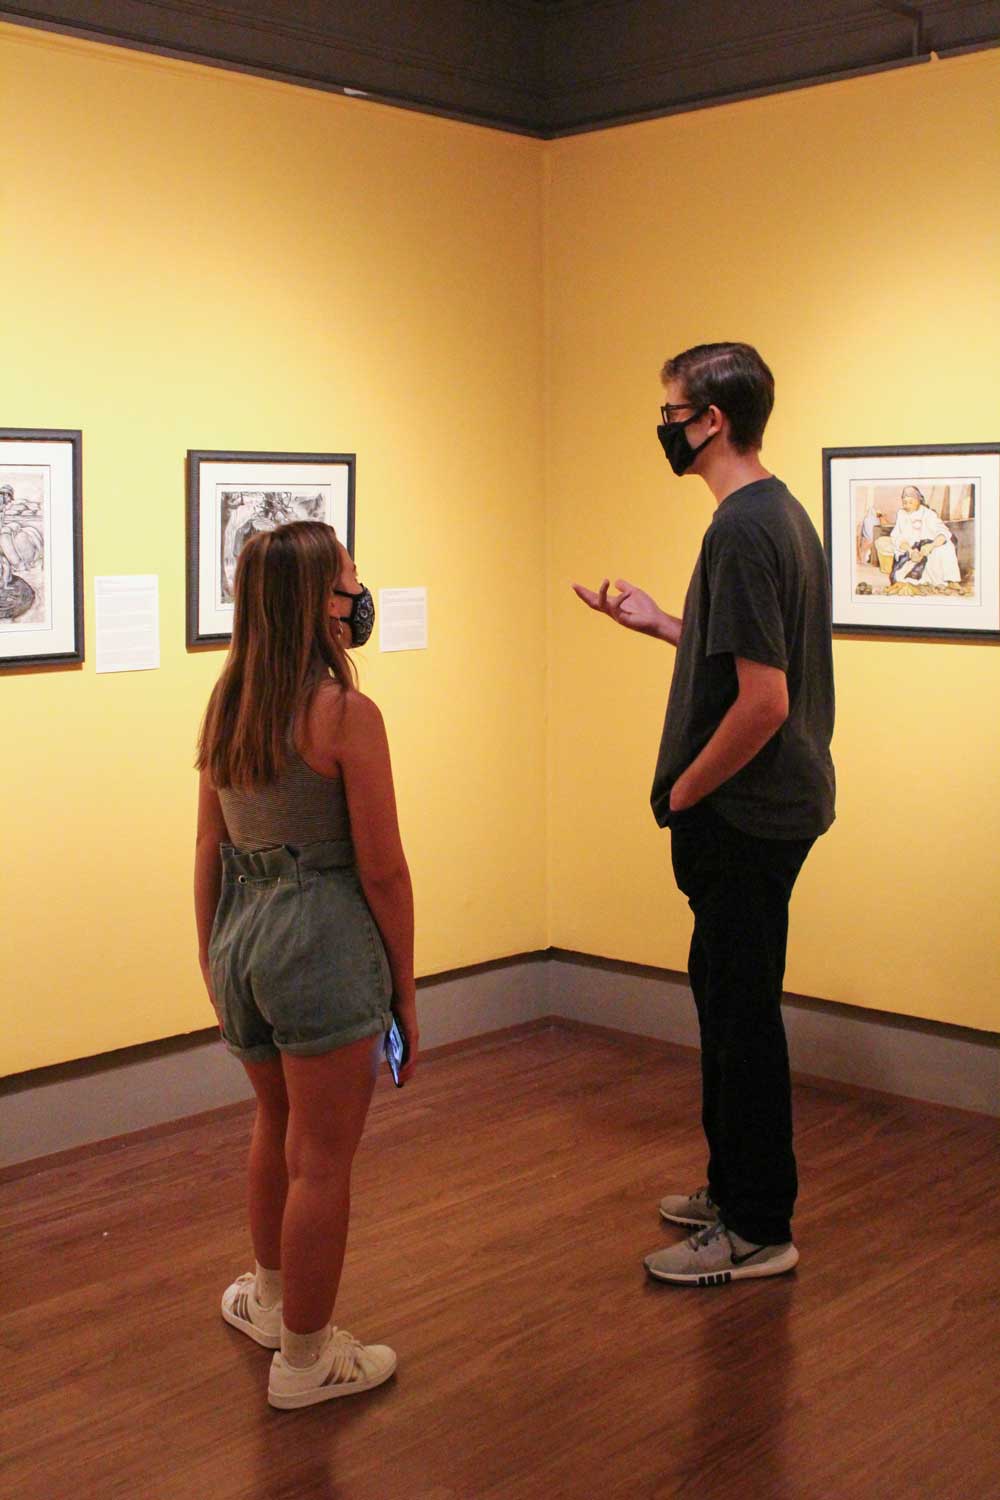 Man and woman speaking to one an other in the Schmucker Art Gallery